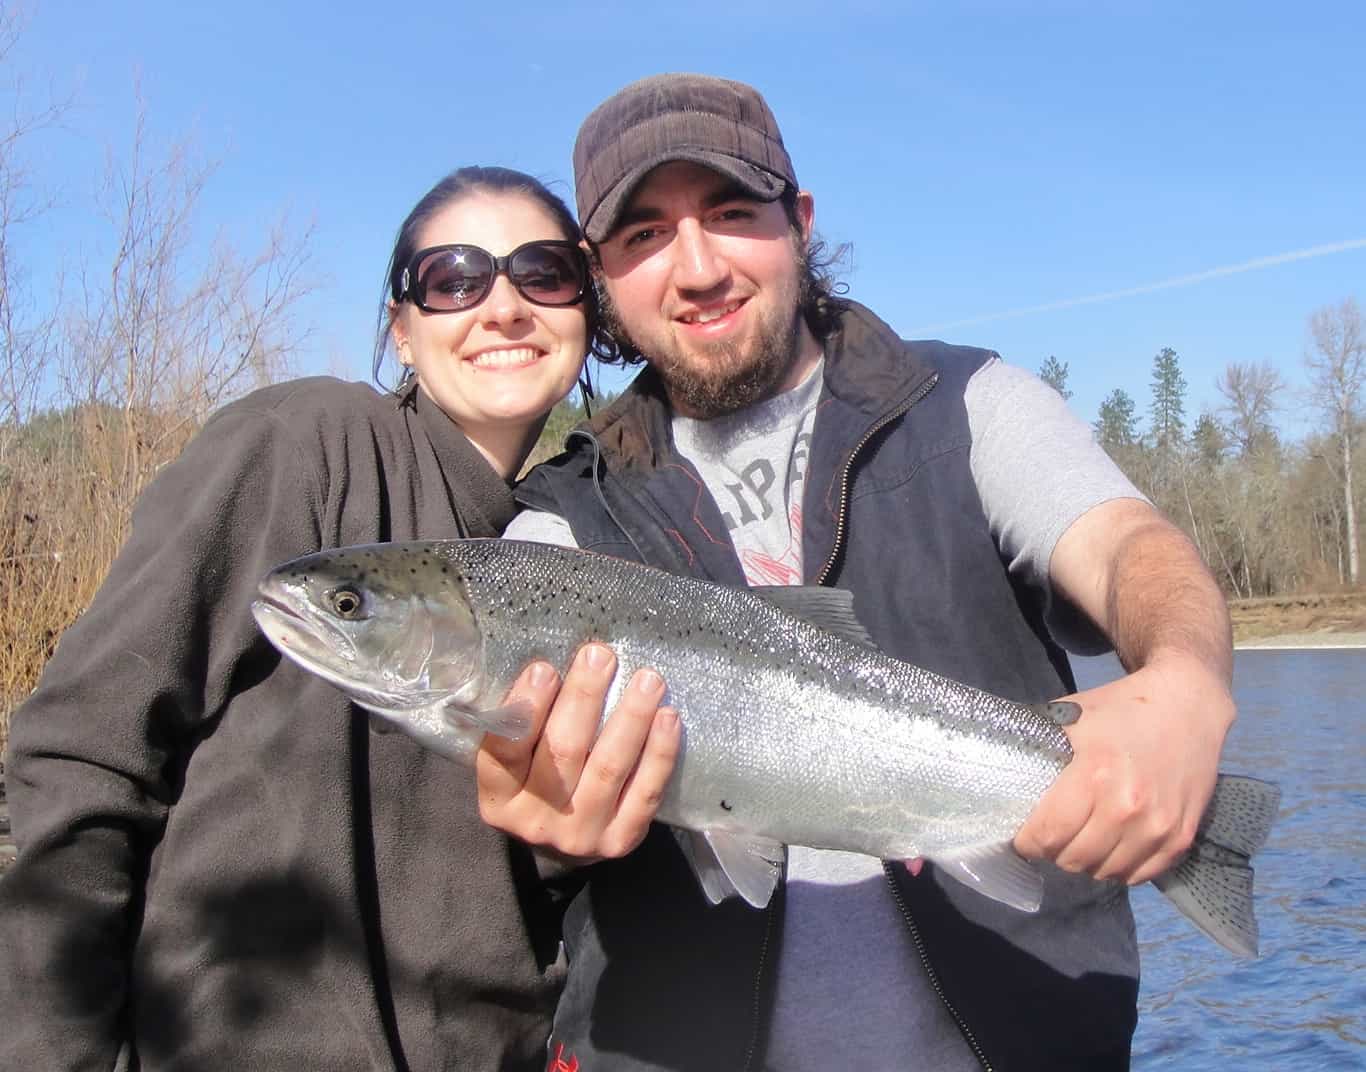 Jacqueline and Jeremy with a Rogue river steelhead caught on the middle Rogue with guide Charlie.